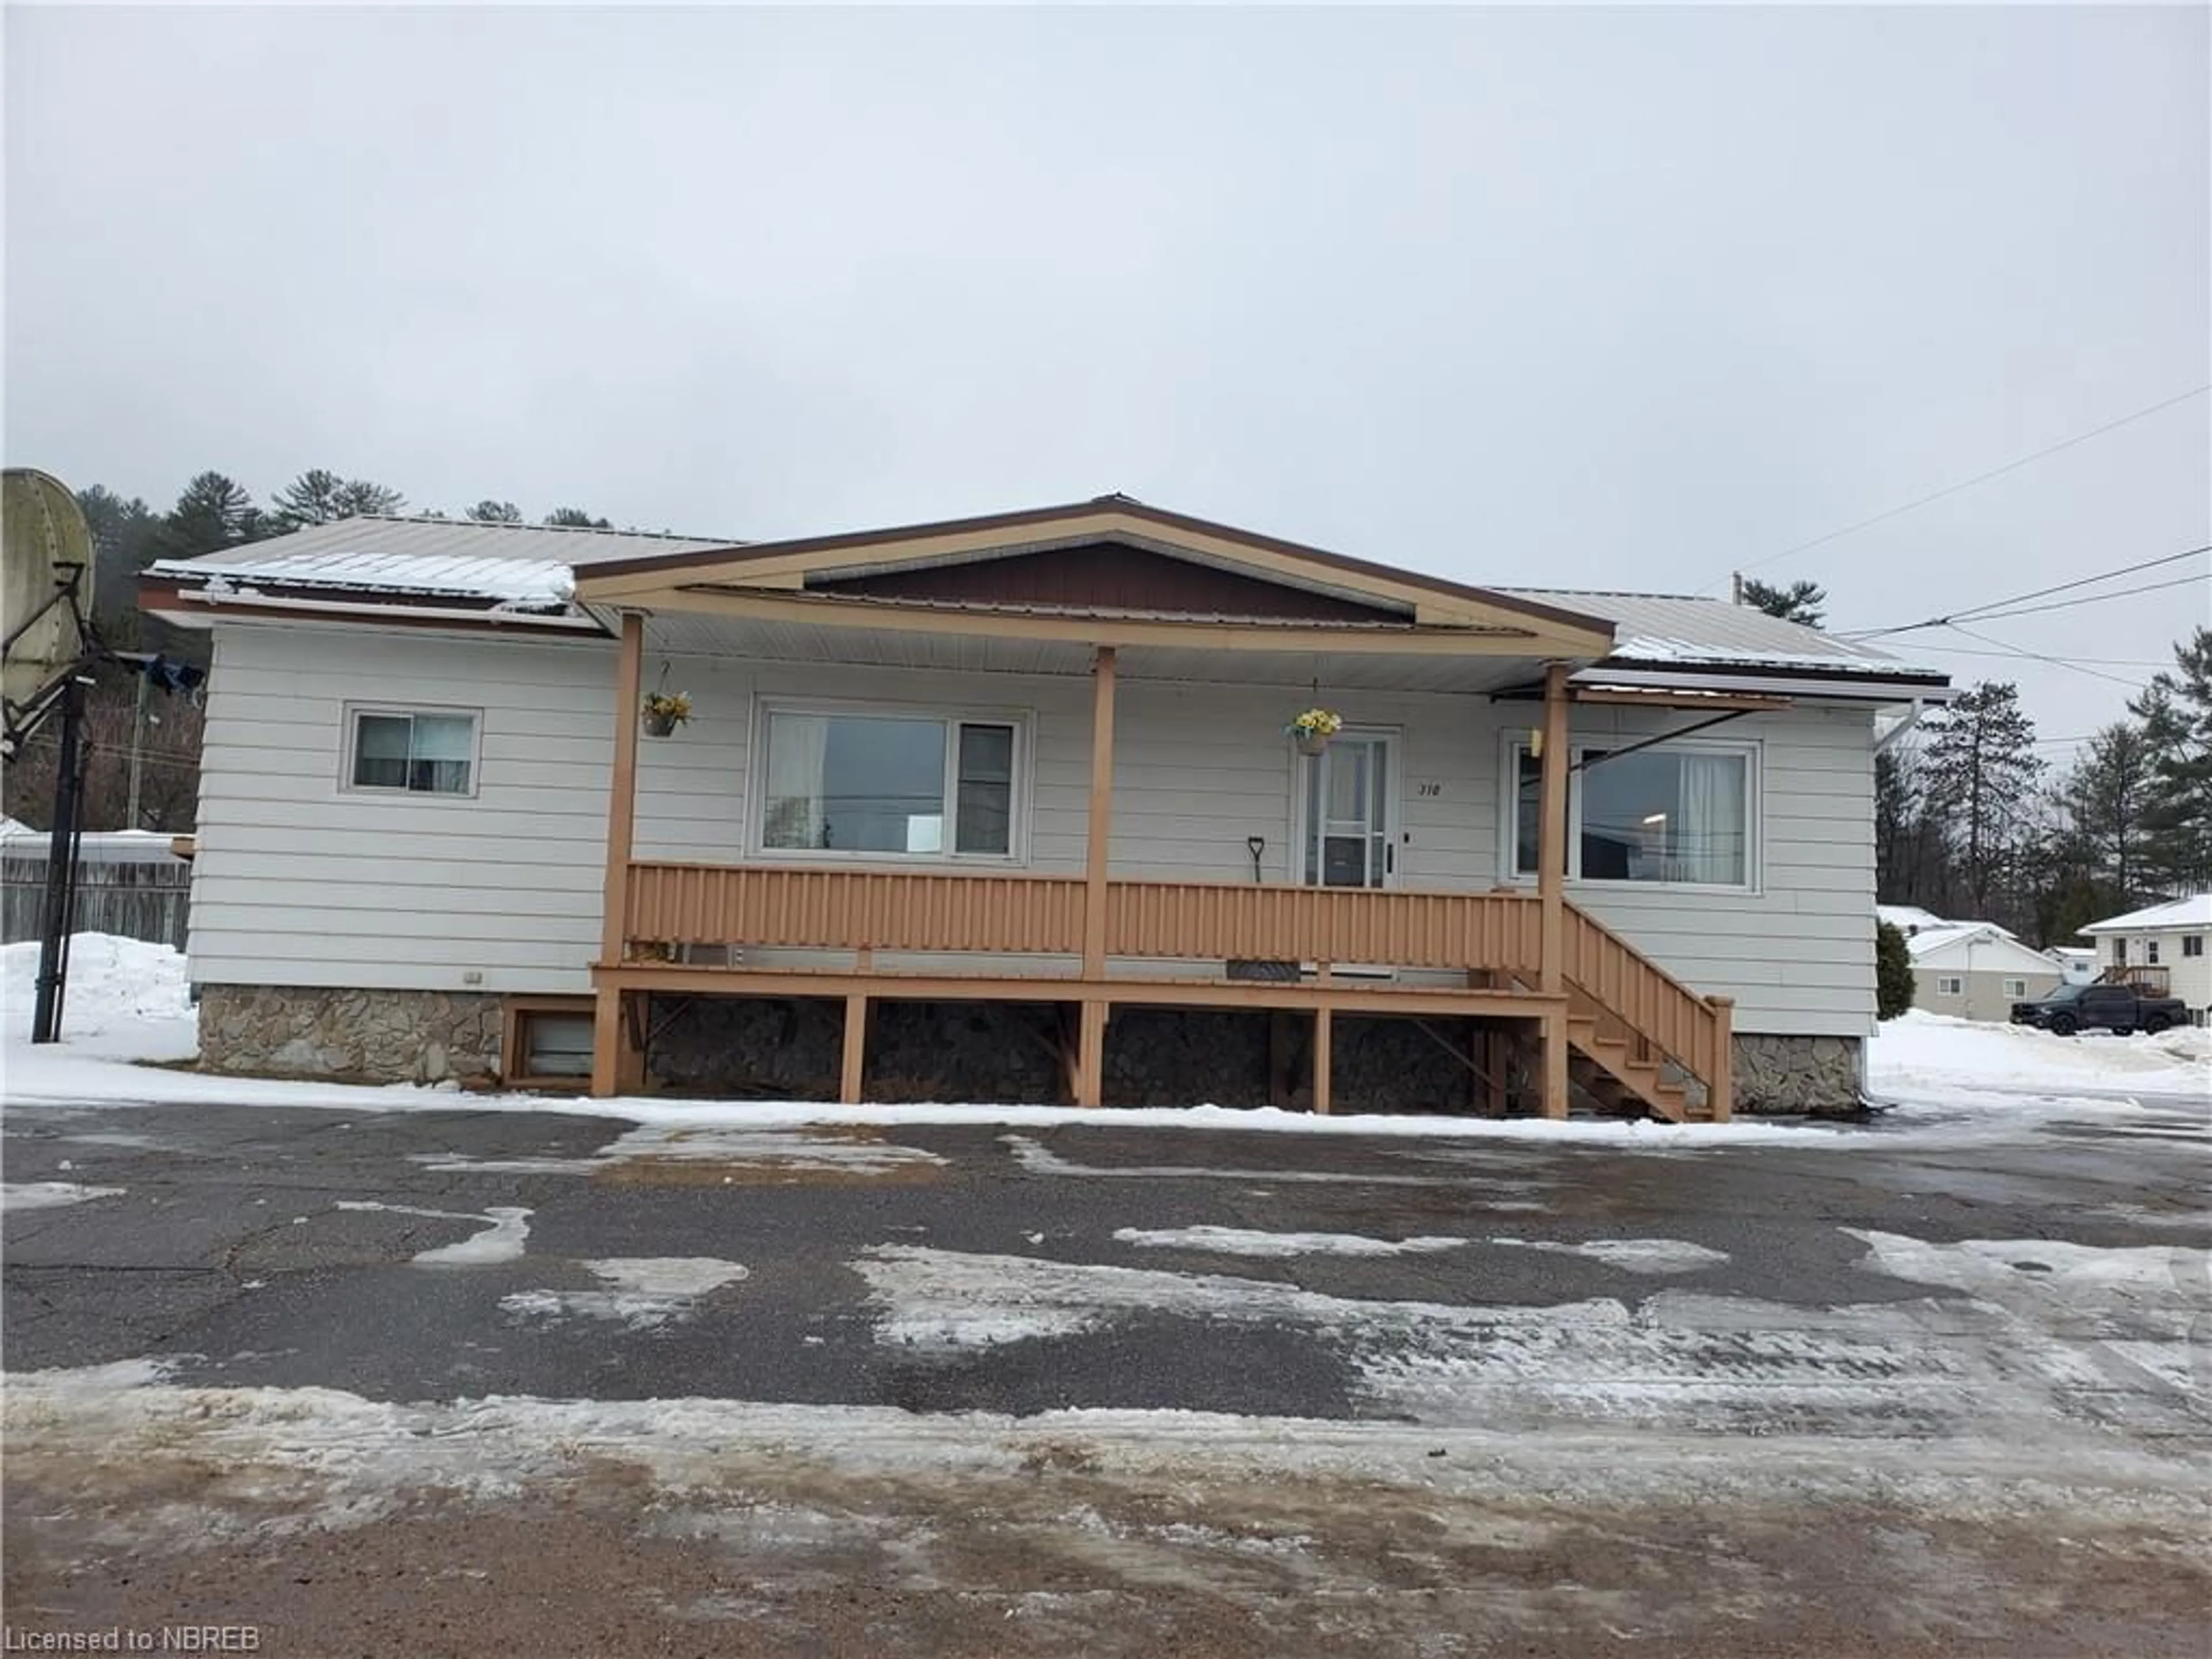 Outside view for 310 Brydges St, Mattawa Ontario P0H 1V0